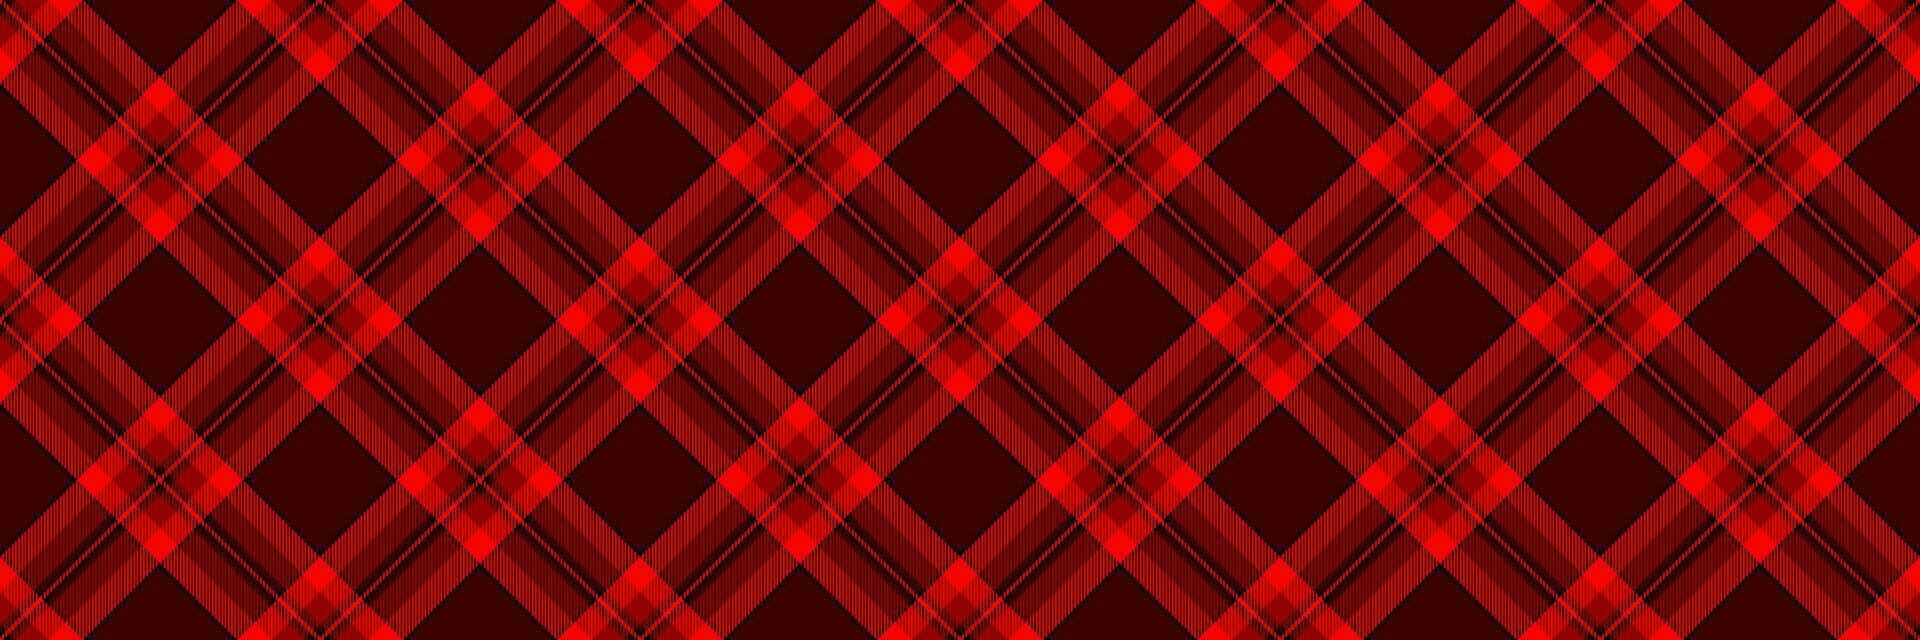 Style textile pattern texture, no people vector plaid seamless. Scarf tartan fabric check background in red and dark colors.